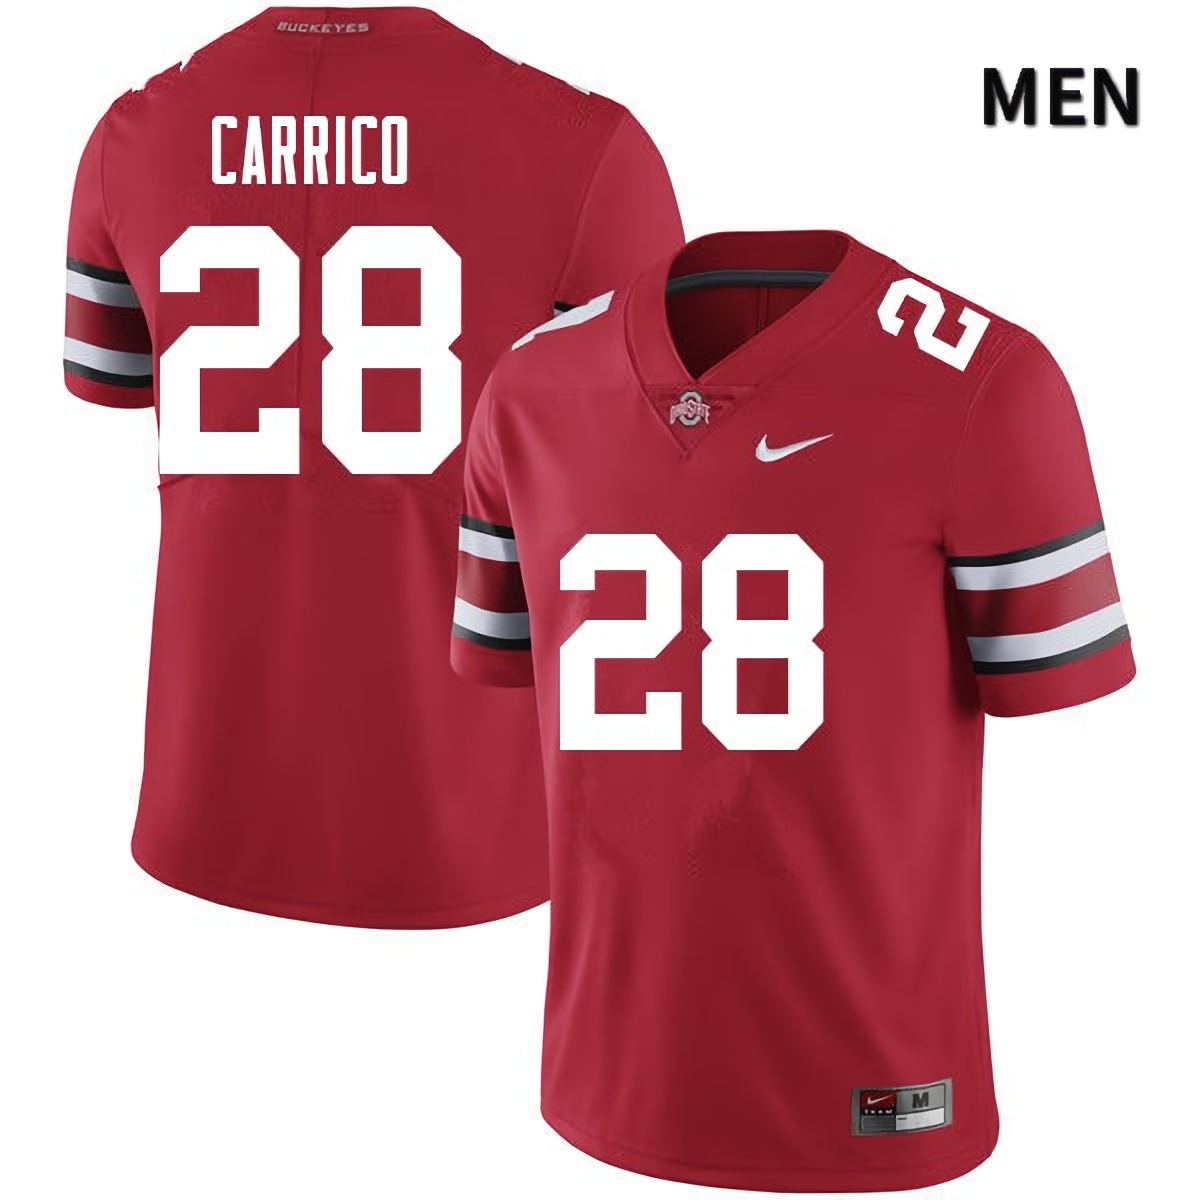 Reid Carrico Ohio State Buckeyes Men's NCAA #28 Red College Stitched Football Jersey PXC6556DU